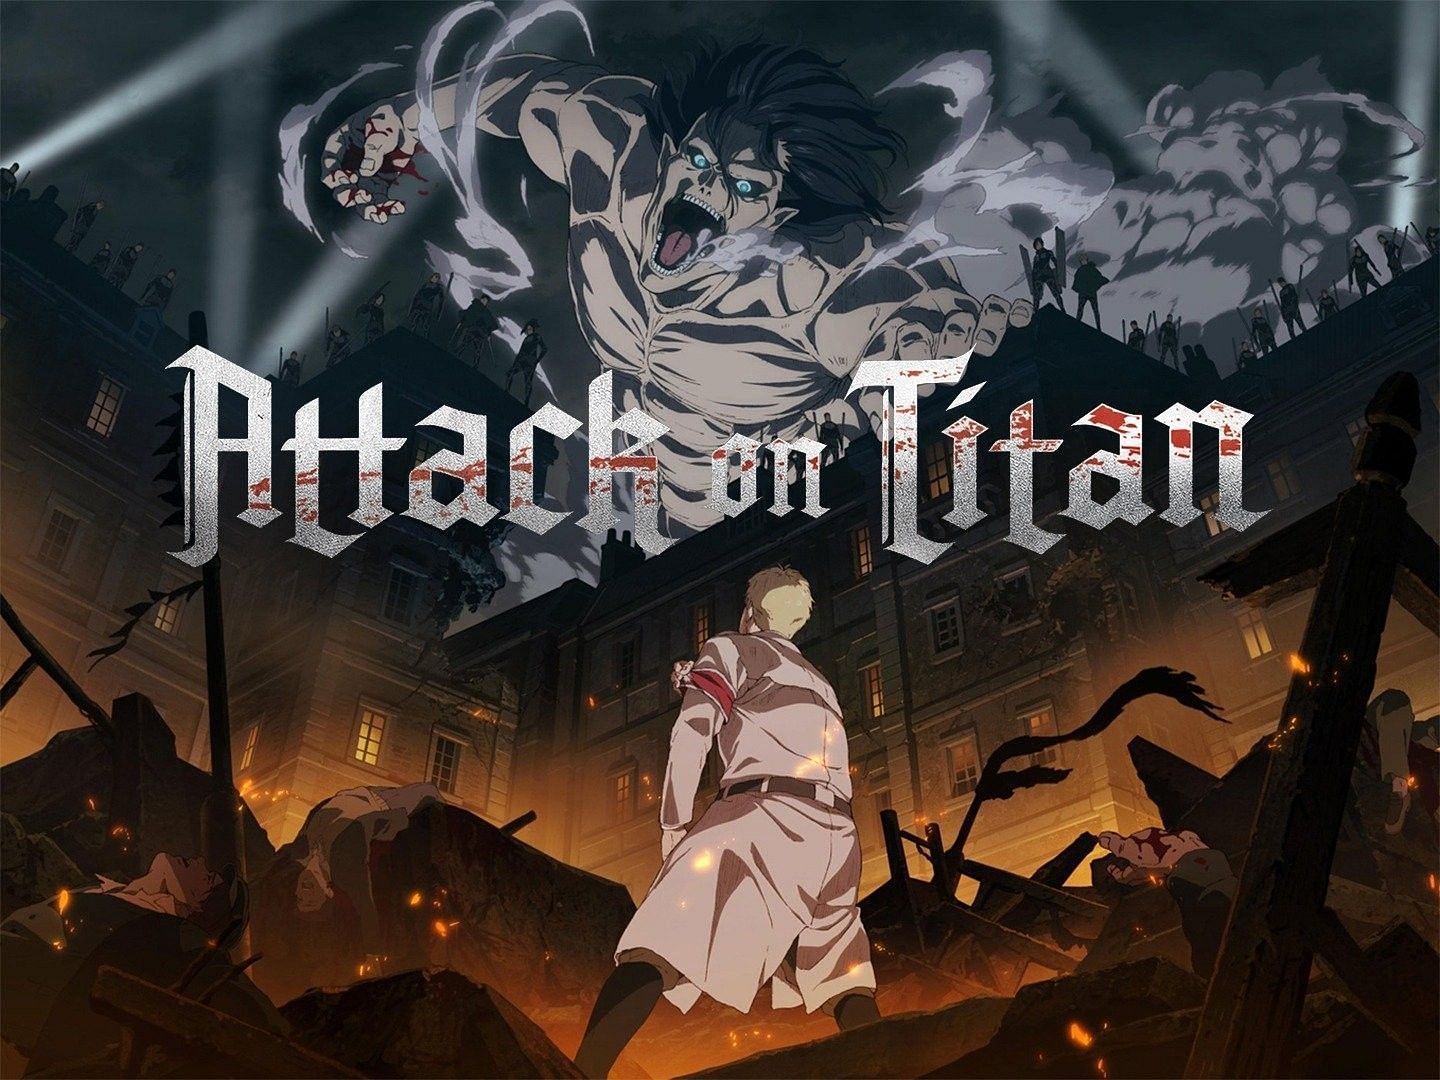 Attack on Titan creators have suggested that the ending could be changed (Image via MAPPA).